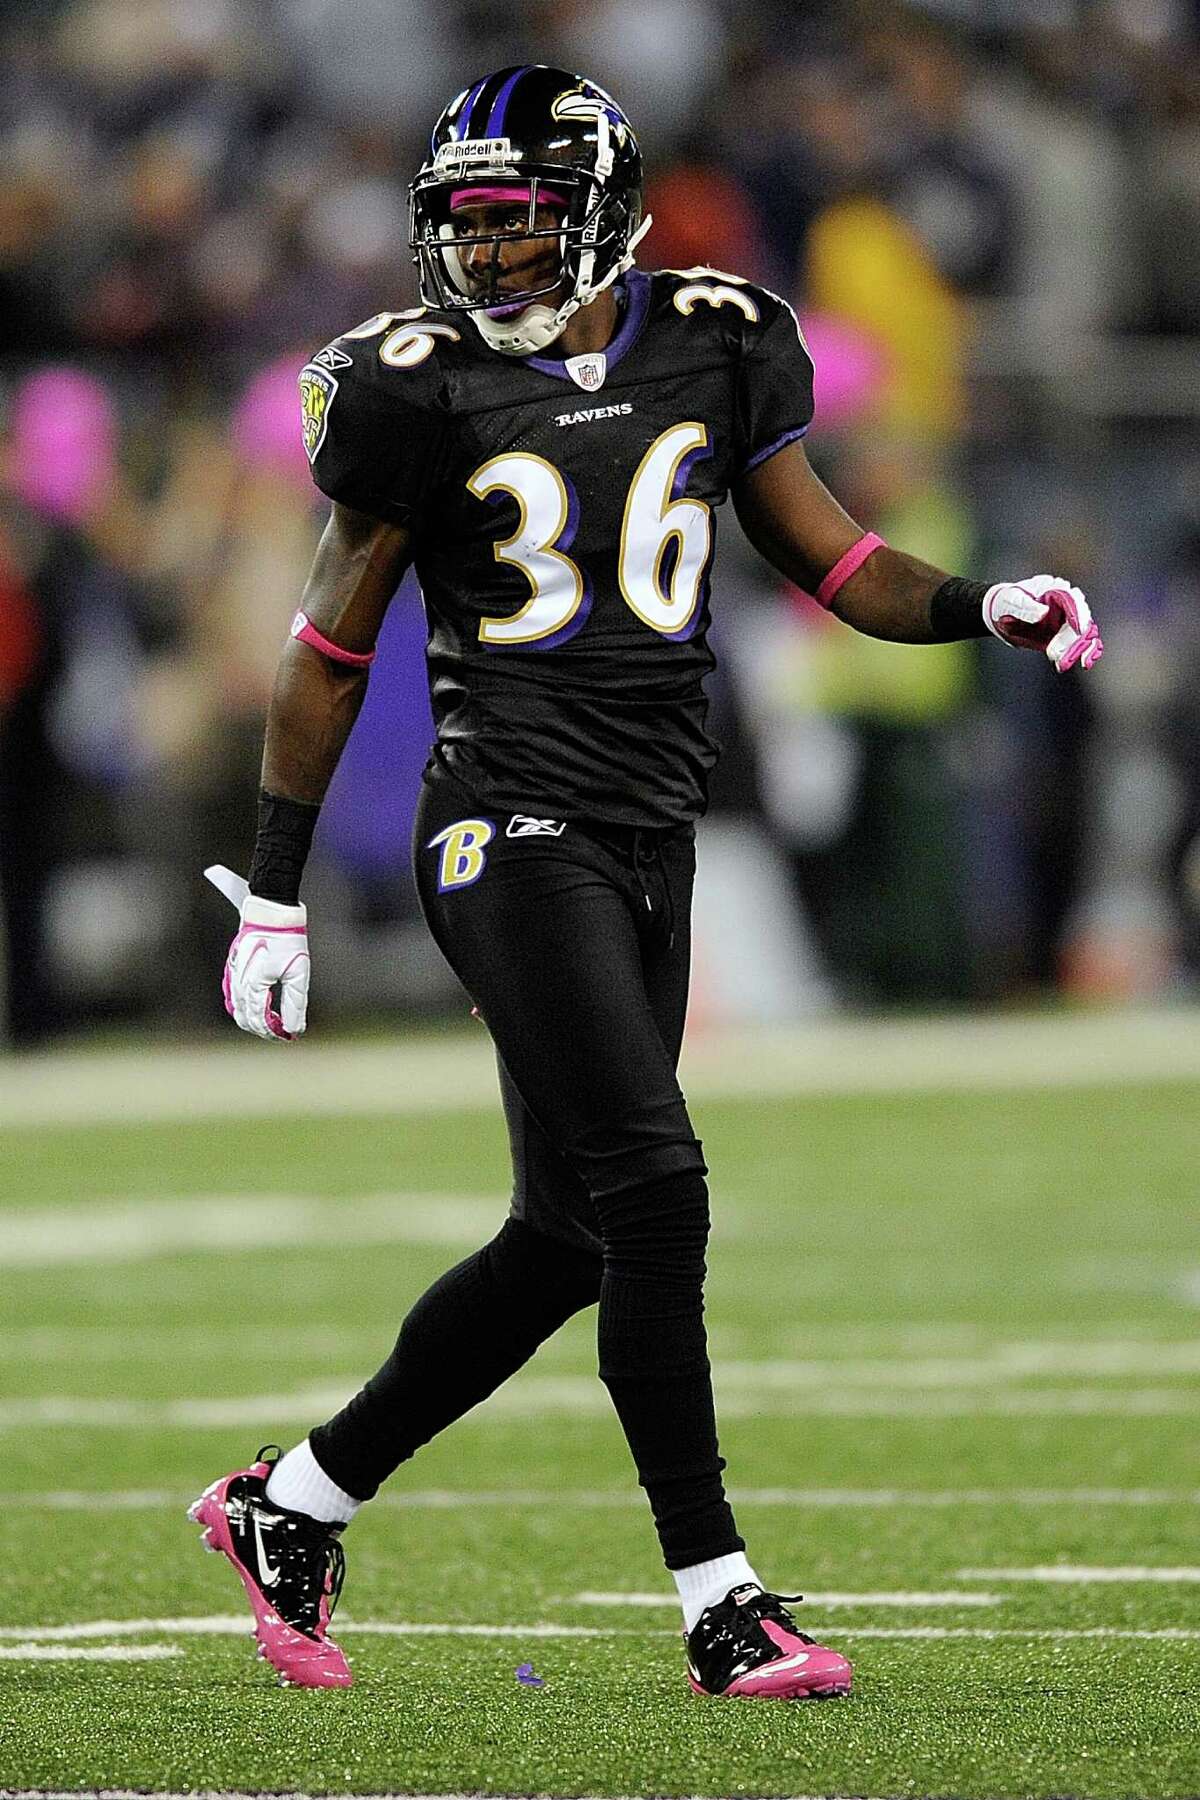 Baltimore Ravens defensive back Danny Gorrer walks across the field during the first half of an NFL football game against the New York Jets in Baltimore, Sunday, Oct. 2, 2011. (AP Photo/Nick Wass)